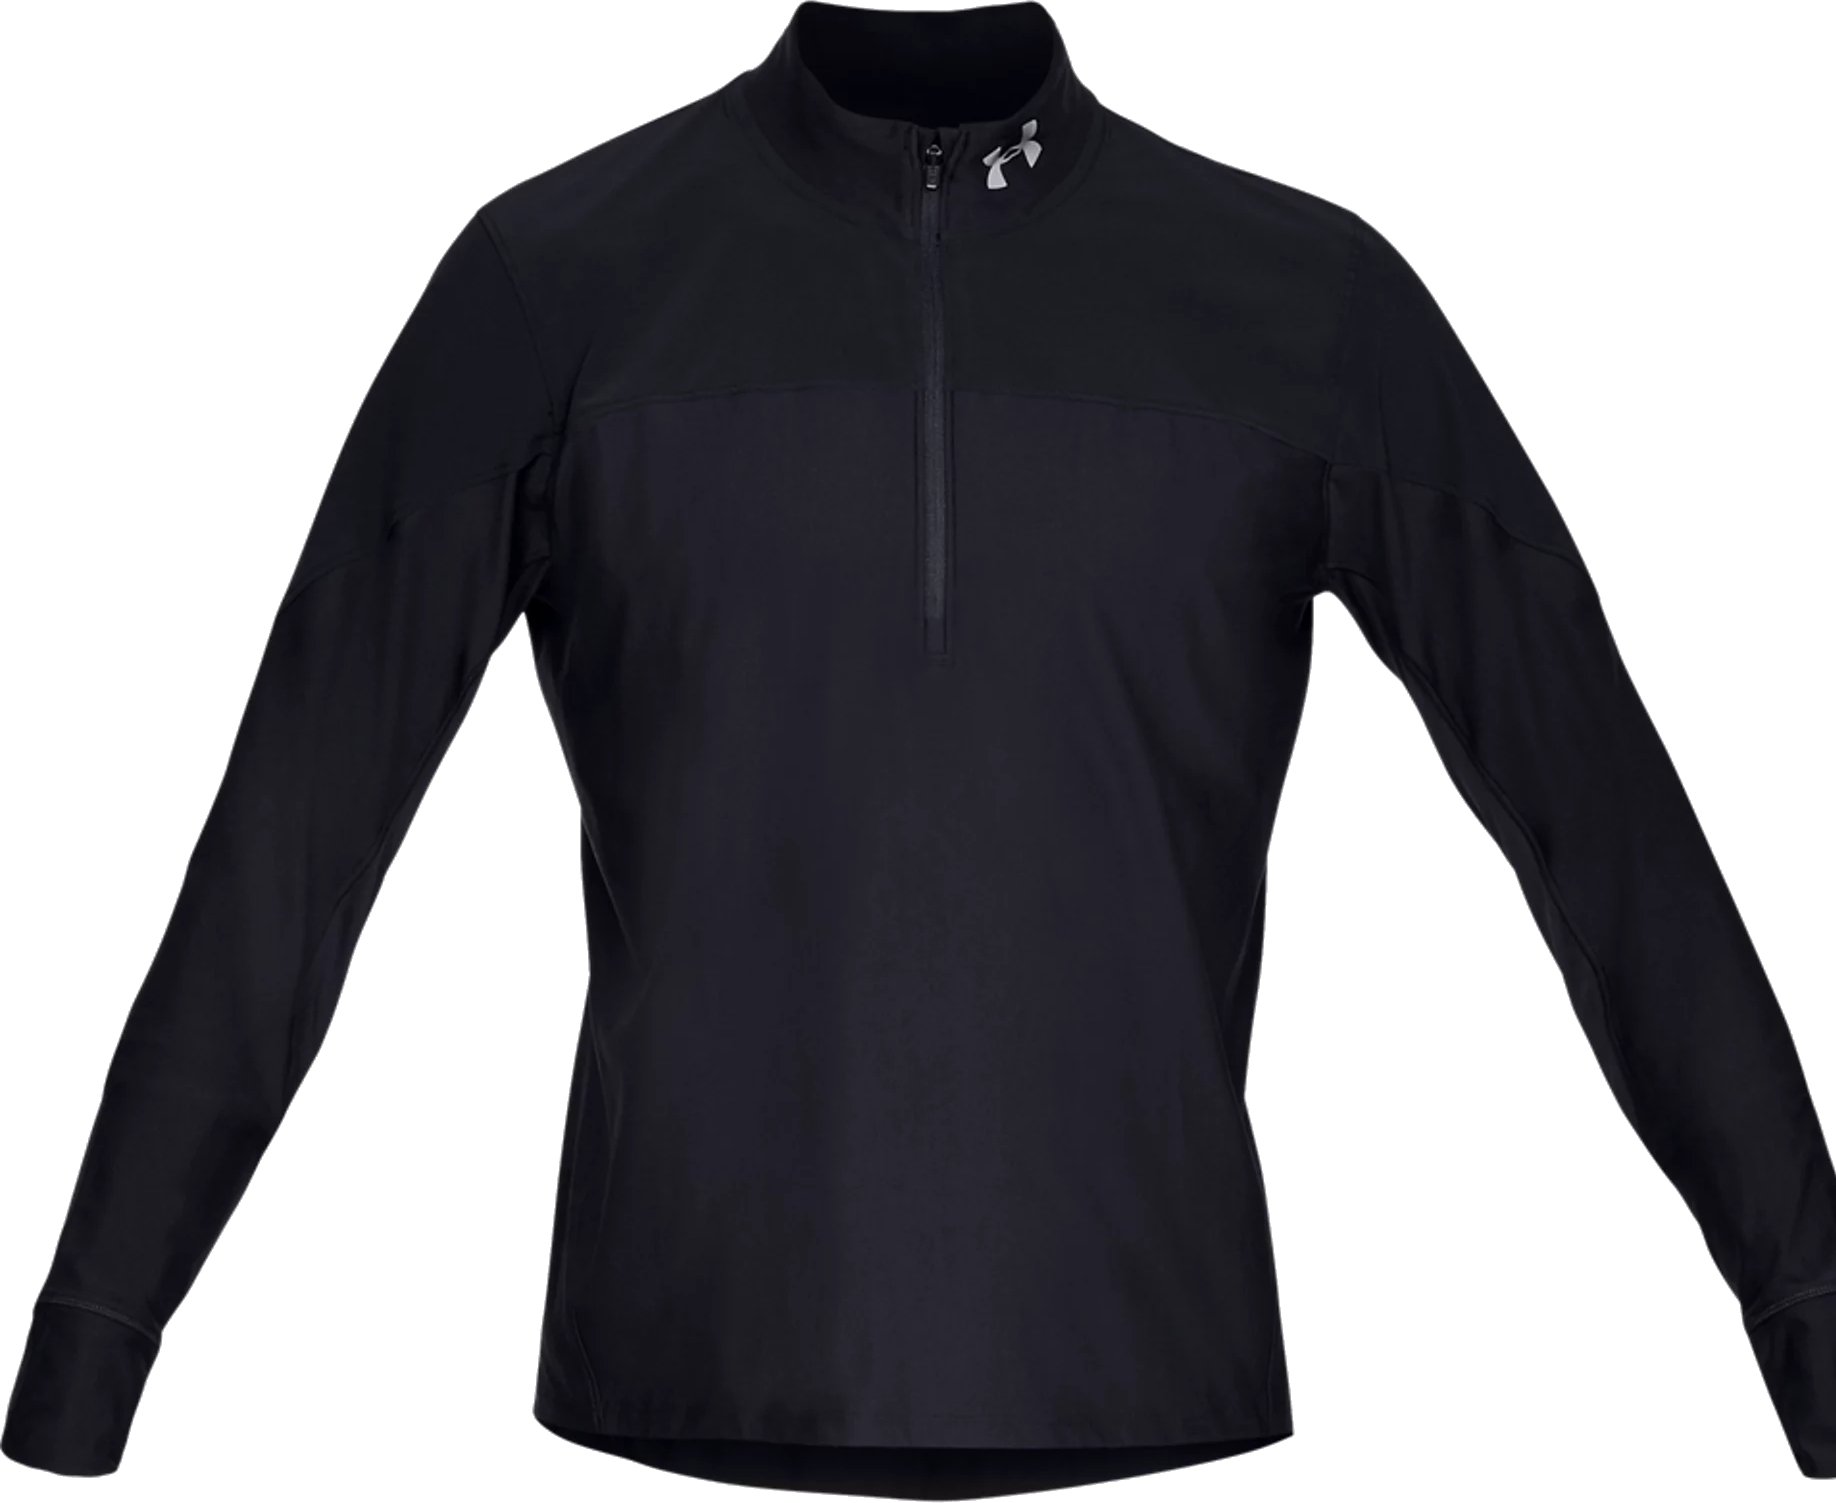 Under Armour Men's Qualifier Run 2.0 ½ Zip, Black (001)/Reflective, Small  at  Men's Clothing store